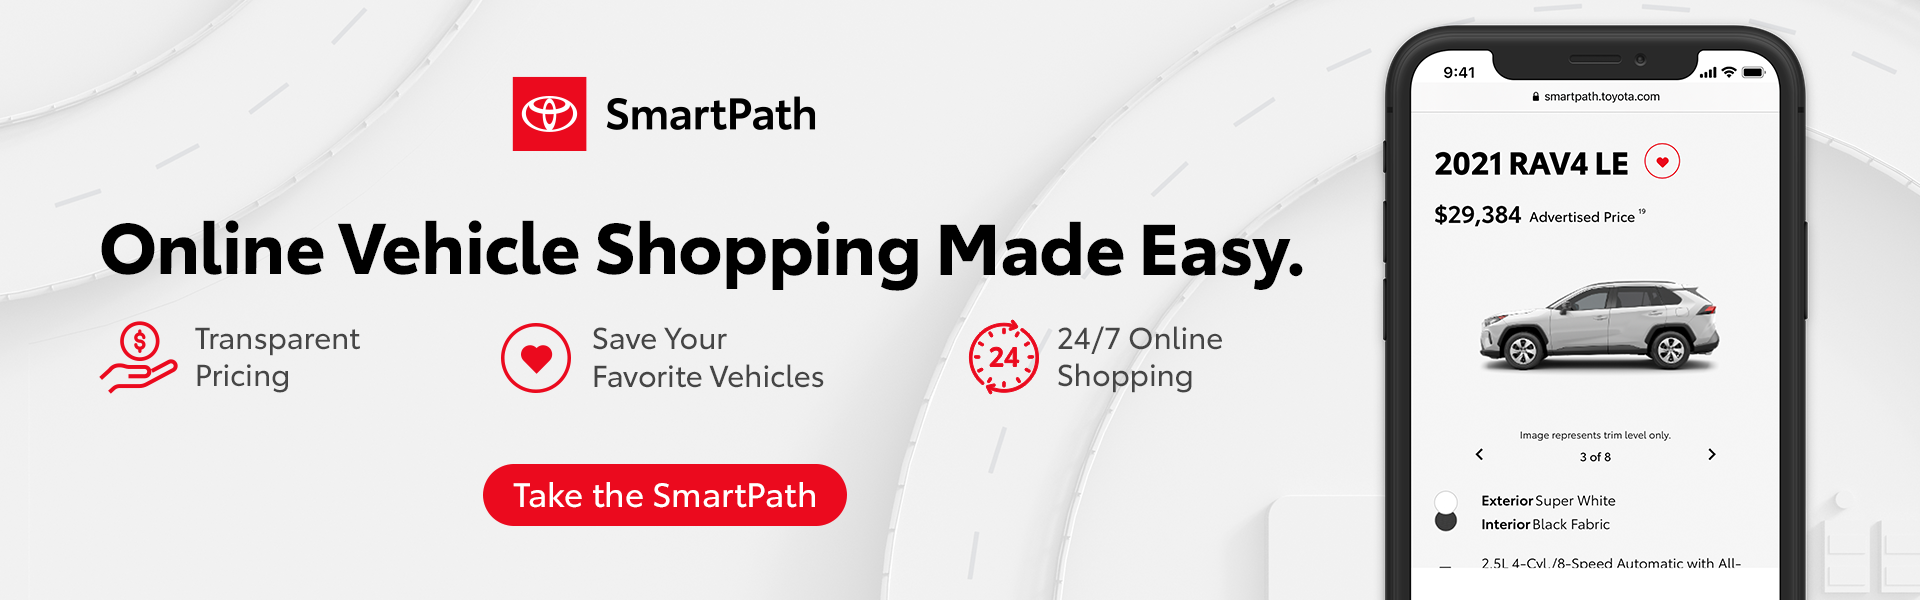 SmartPath - Online Vehicle Shopping Made Easy.